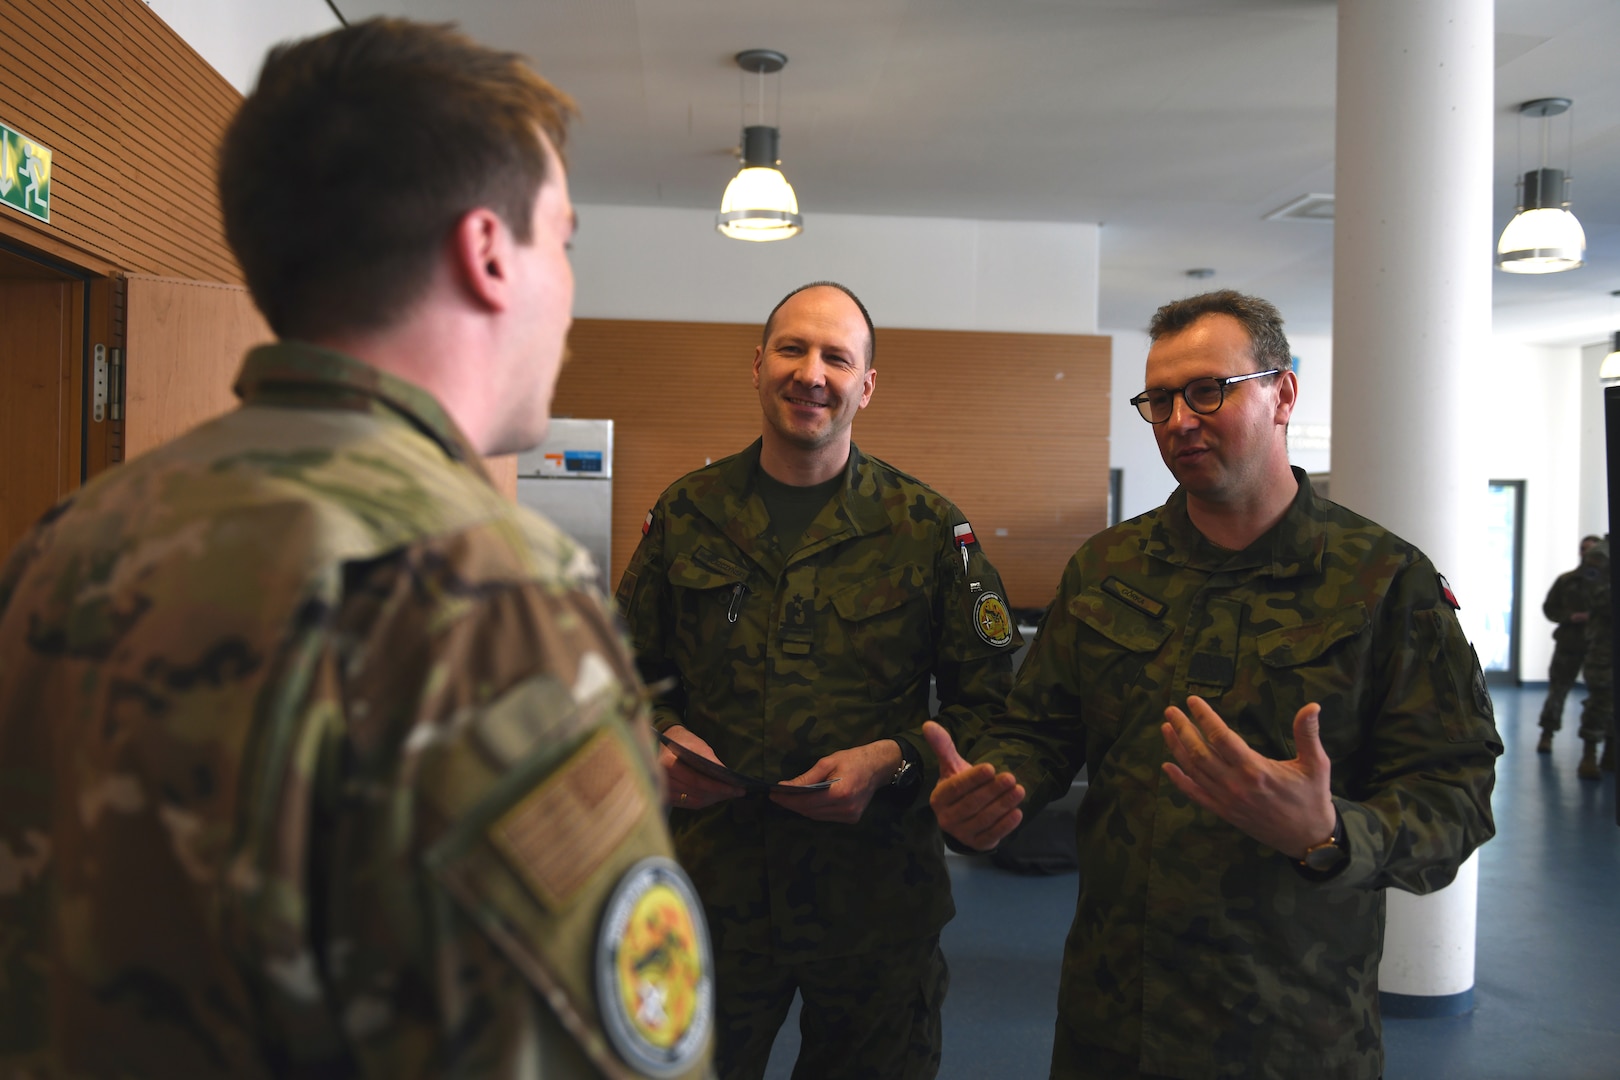 An Air National Guard member talks with Lt. Col. Maciej Wereszczynski, center, a senior specialist in the Space Technology Branch in Poland’s Ministry of National Defence, and Brig. Gen Marcin Gorka, director of the Department of Innovation of the Polish Ministry of National Defence and Plenipotentiary of the Minister of National Defence for Space, during Vulcan Guard Bolt 6, Ramstein Air Base, Germany, March 28, 2024. The space-focused exercise, now in its sixth iteration, is an Air National Guard-led event that seeks to integrate operations, intelligence and cyber personnel from across all seven Guard space states and NATO partners, incorporating several diverse space weapons systems in a realistic threat-based scenario.